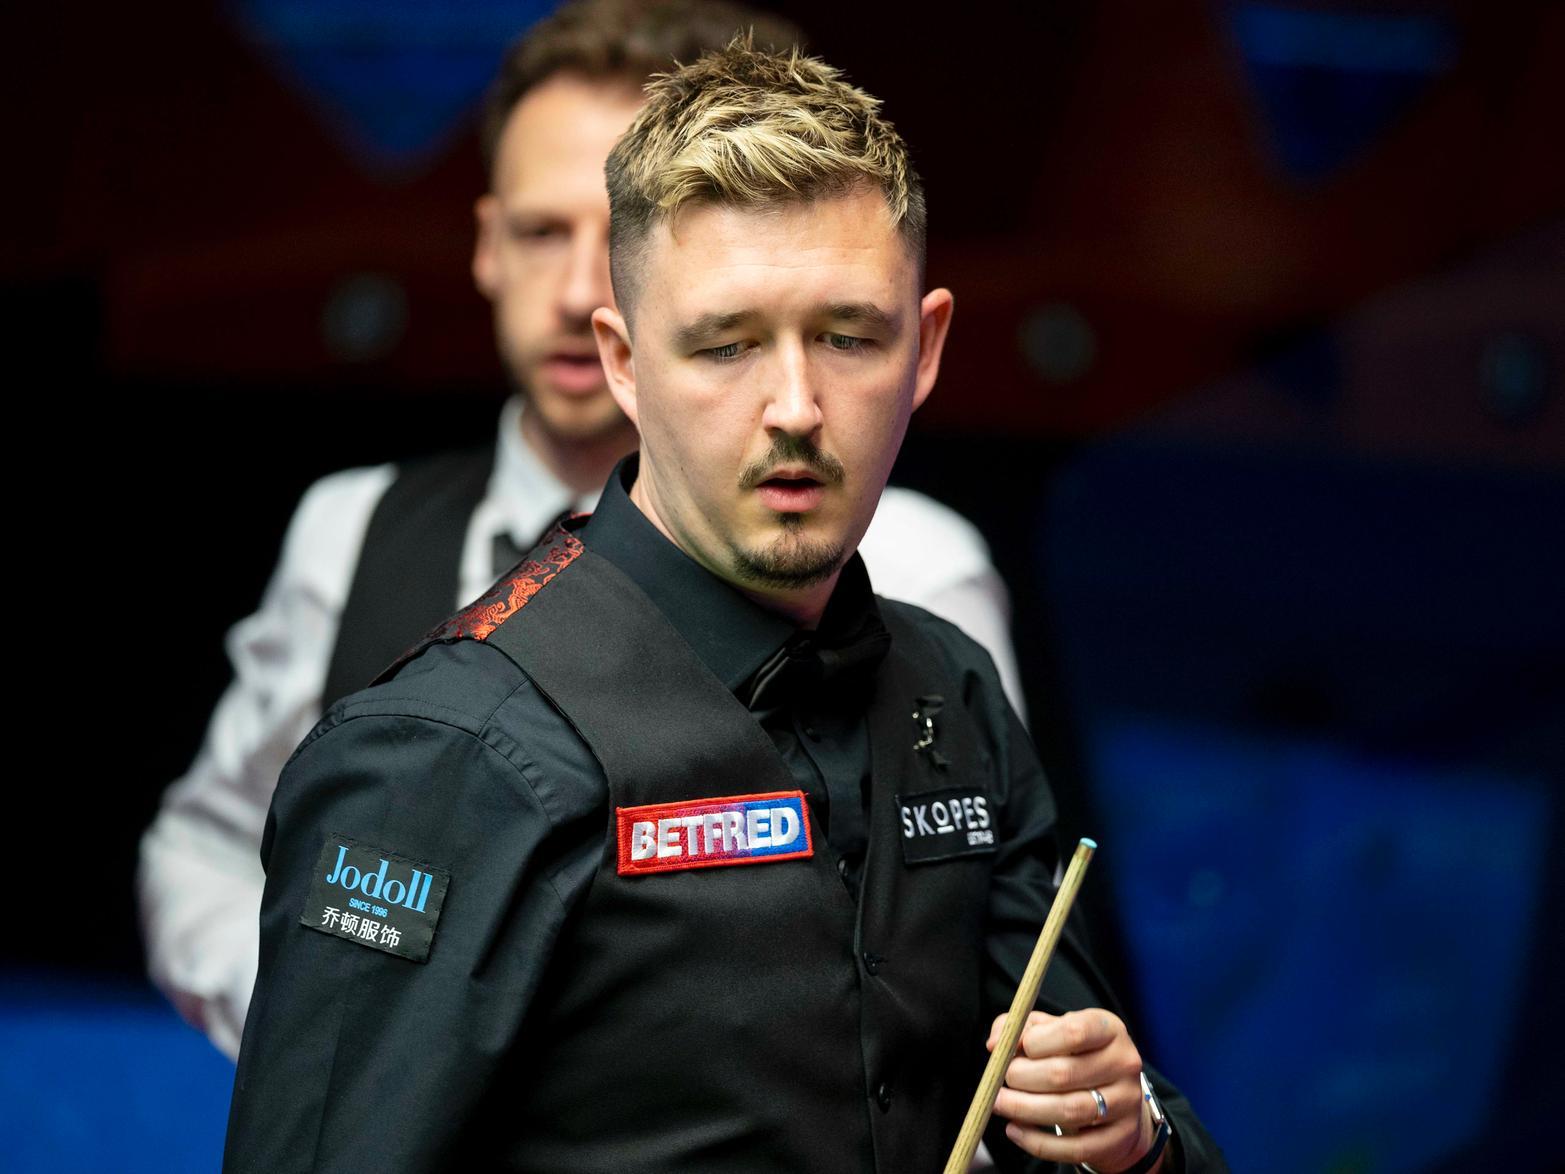 All you need to know about the World Snooker Championship final